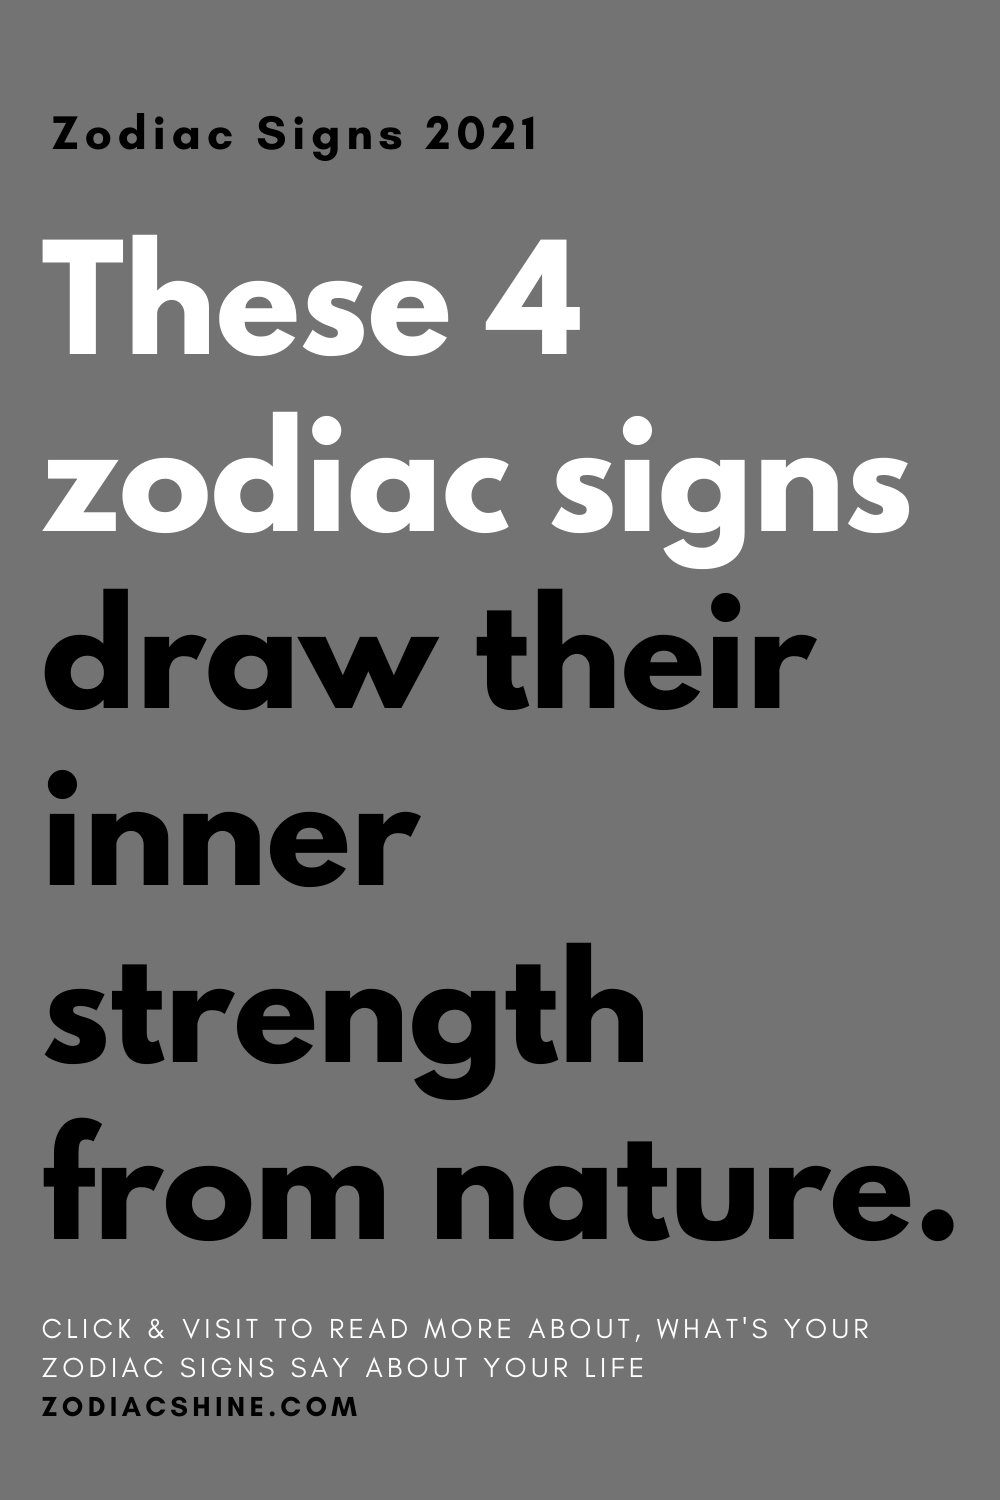 These 4 zodiac signs draw their inner strength from nature